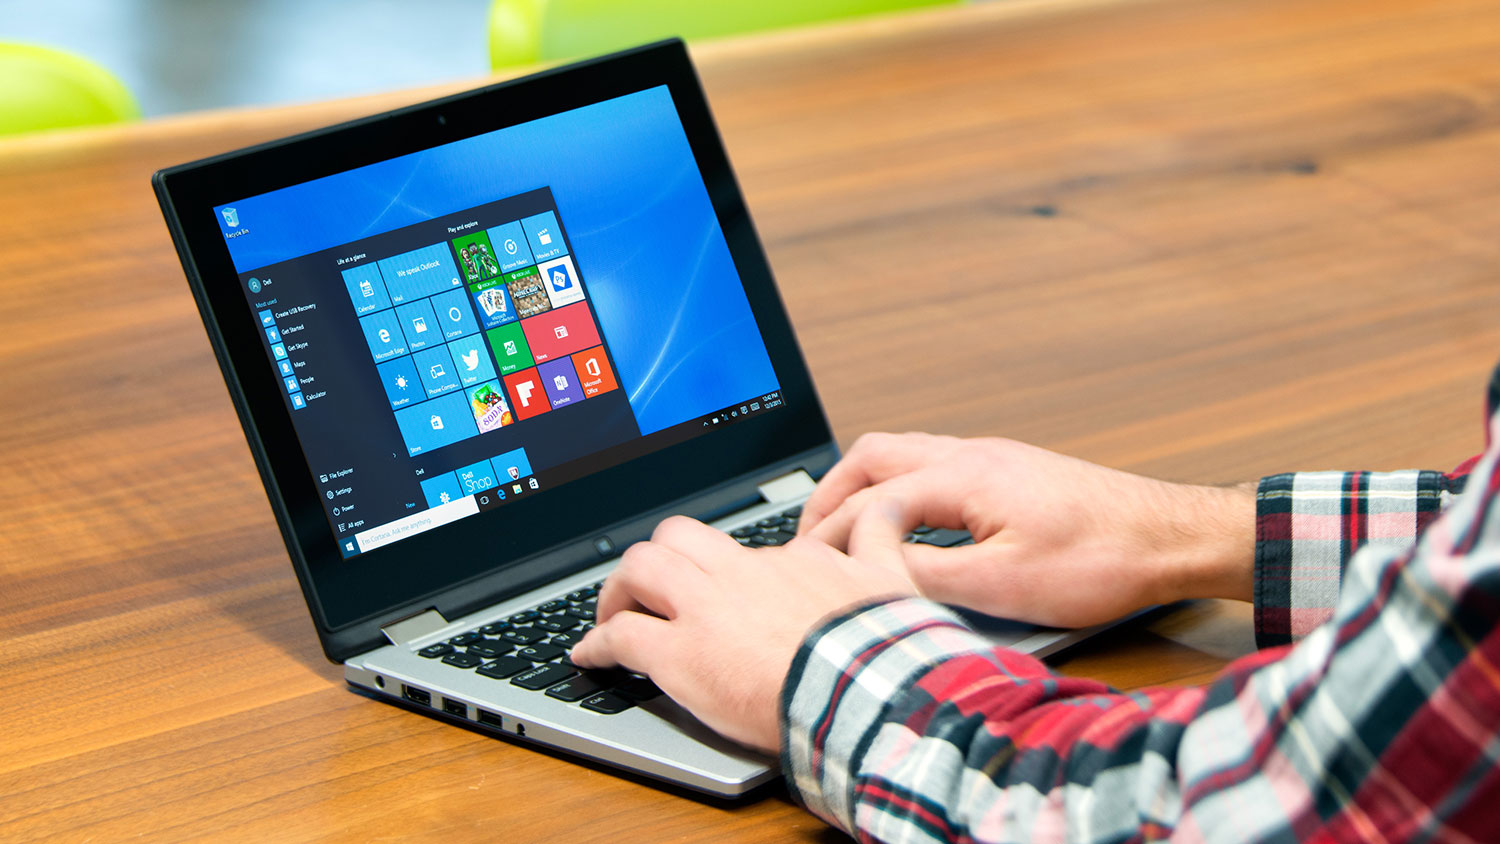 Dell Inspiron 11 3000 Series 2-in-1 Special Edition Review